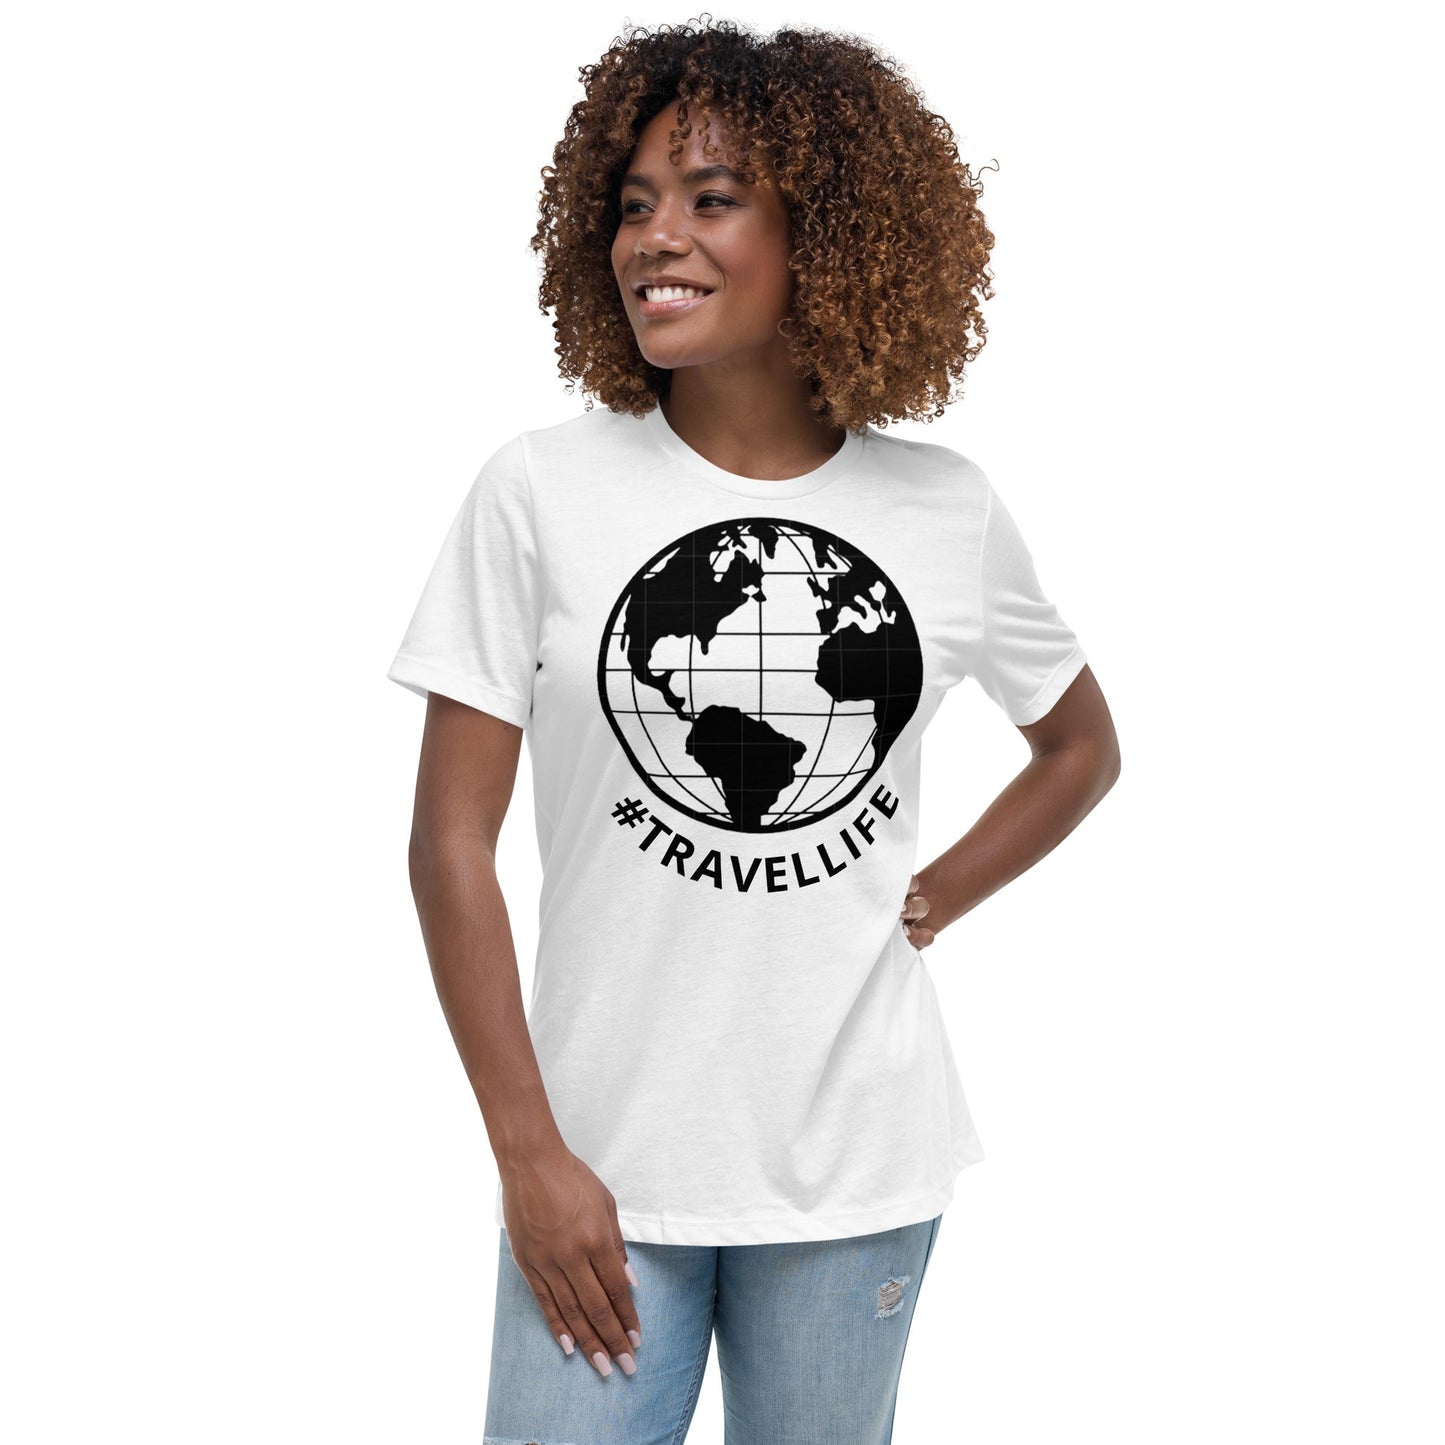 #Travellife World Women's White Relaxed T-Shirt Large Black Text 2X+